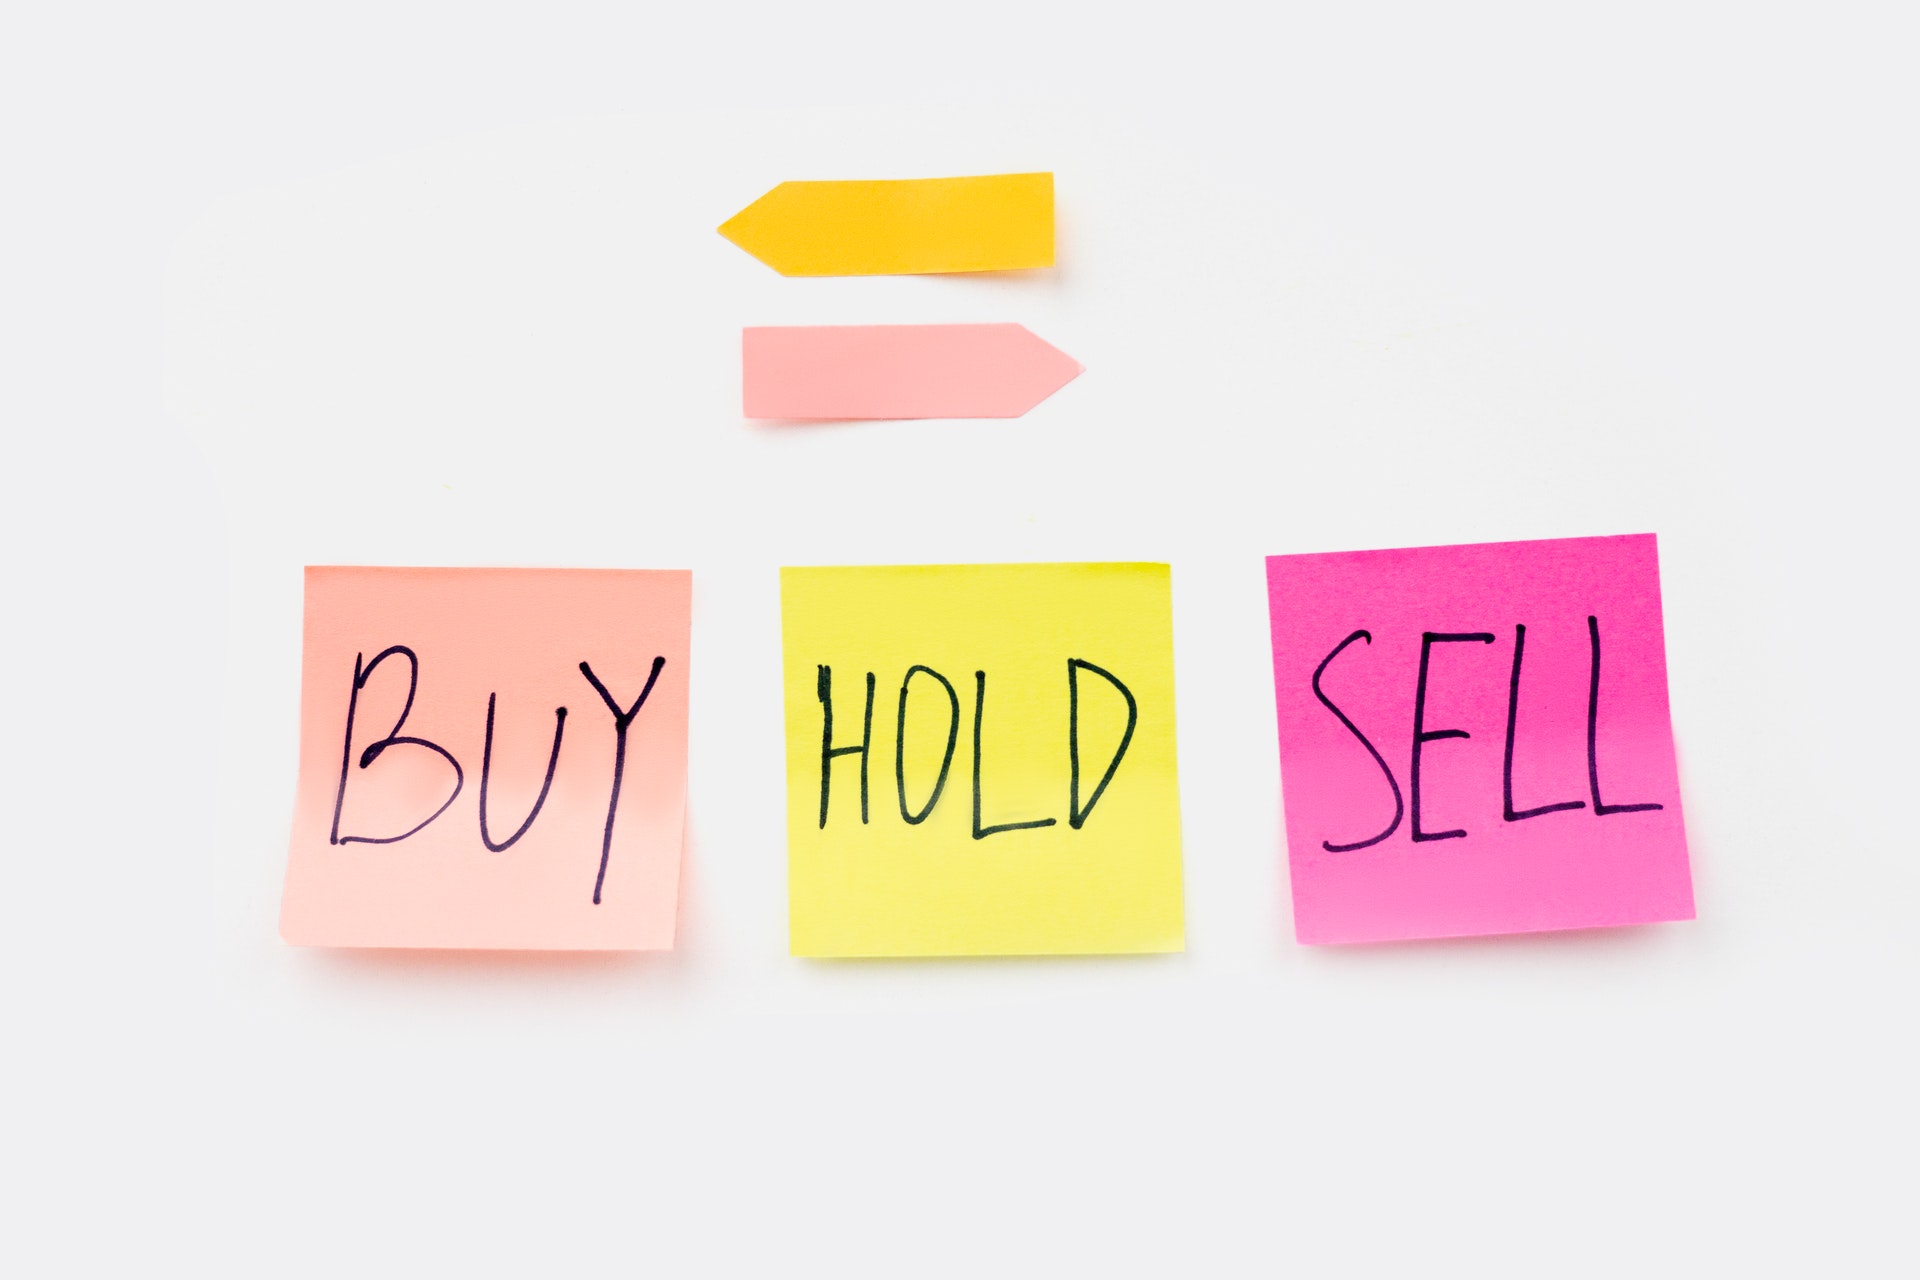 3 post it notes labeled Buy, Hold, and Sell